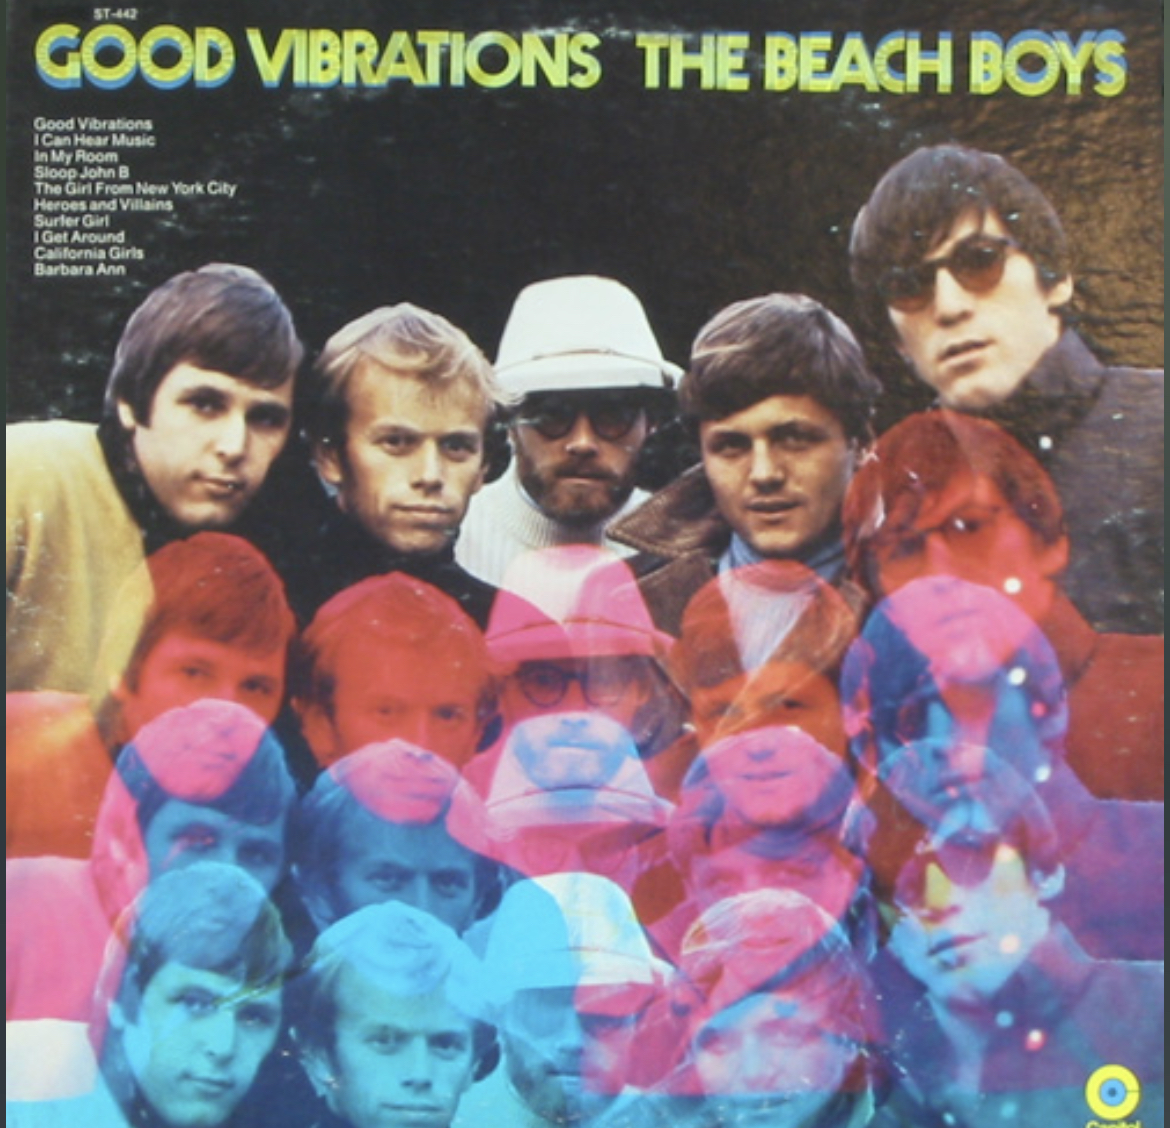 The Beach Boys - Good Vibrations - Reviews - Album of The Year